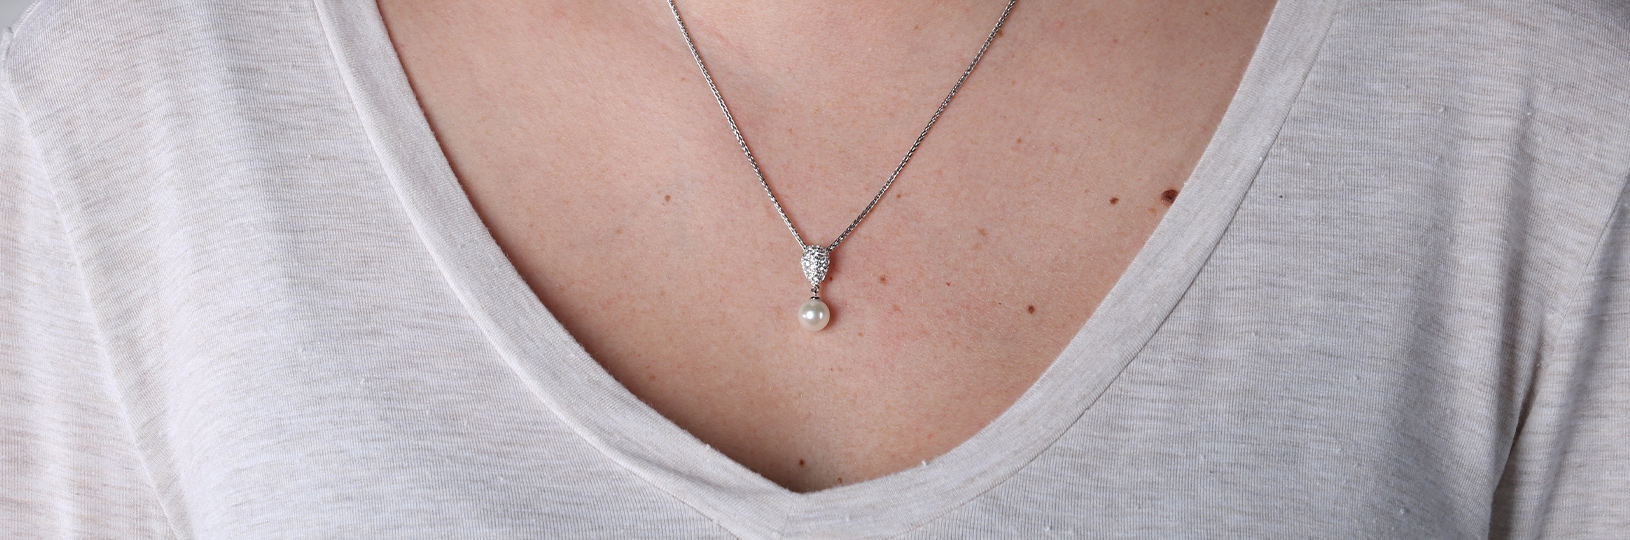 Long necklace with cultured pearl pendant